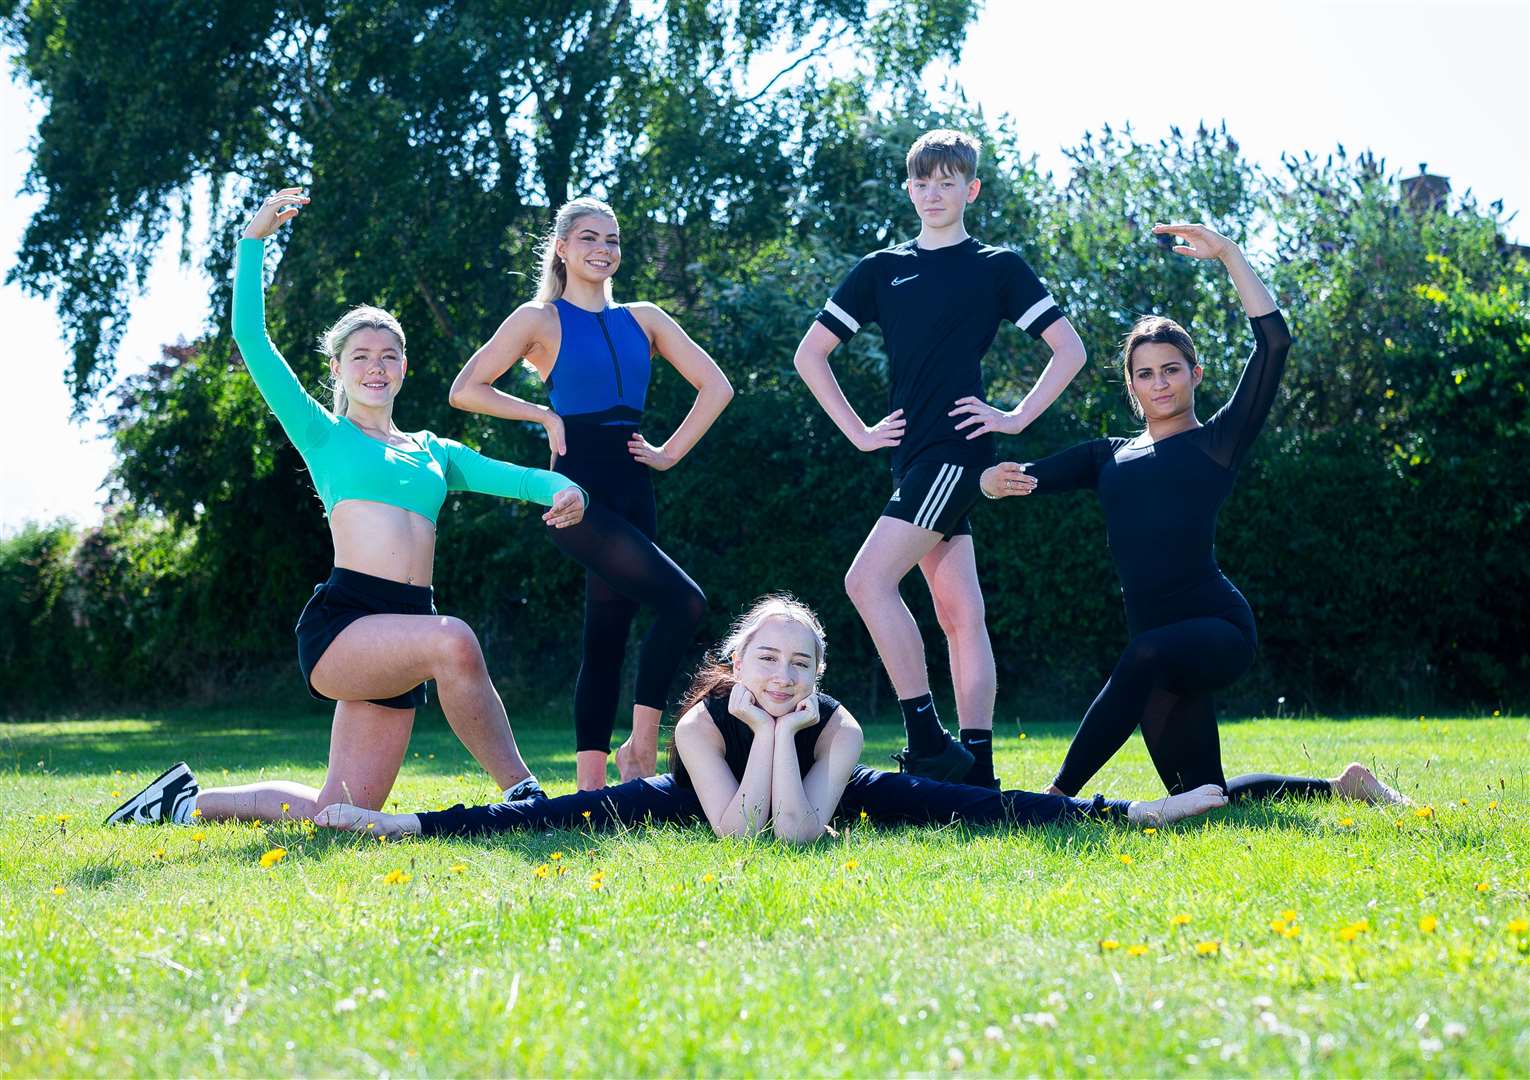 Students from Springwood High School in Lynn have been celebrating multiple successes in the world of dance. Credit: Ian Burt/Barking Dog Media